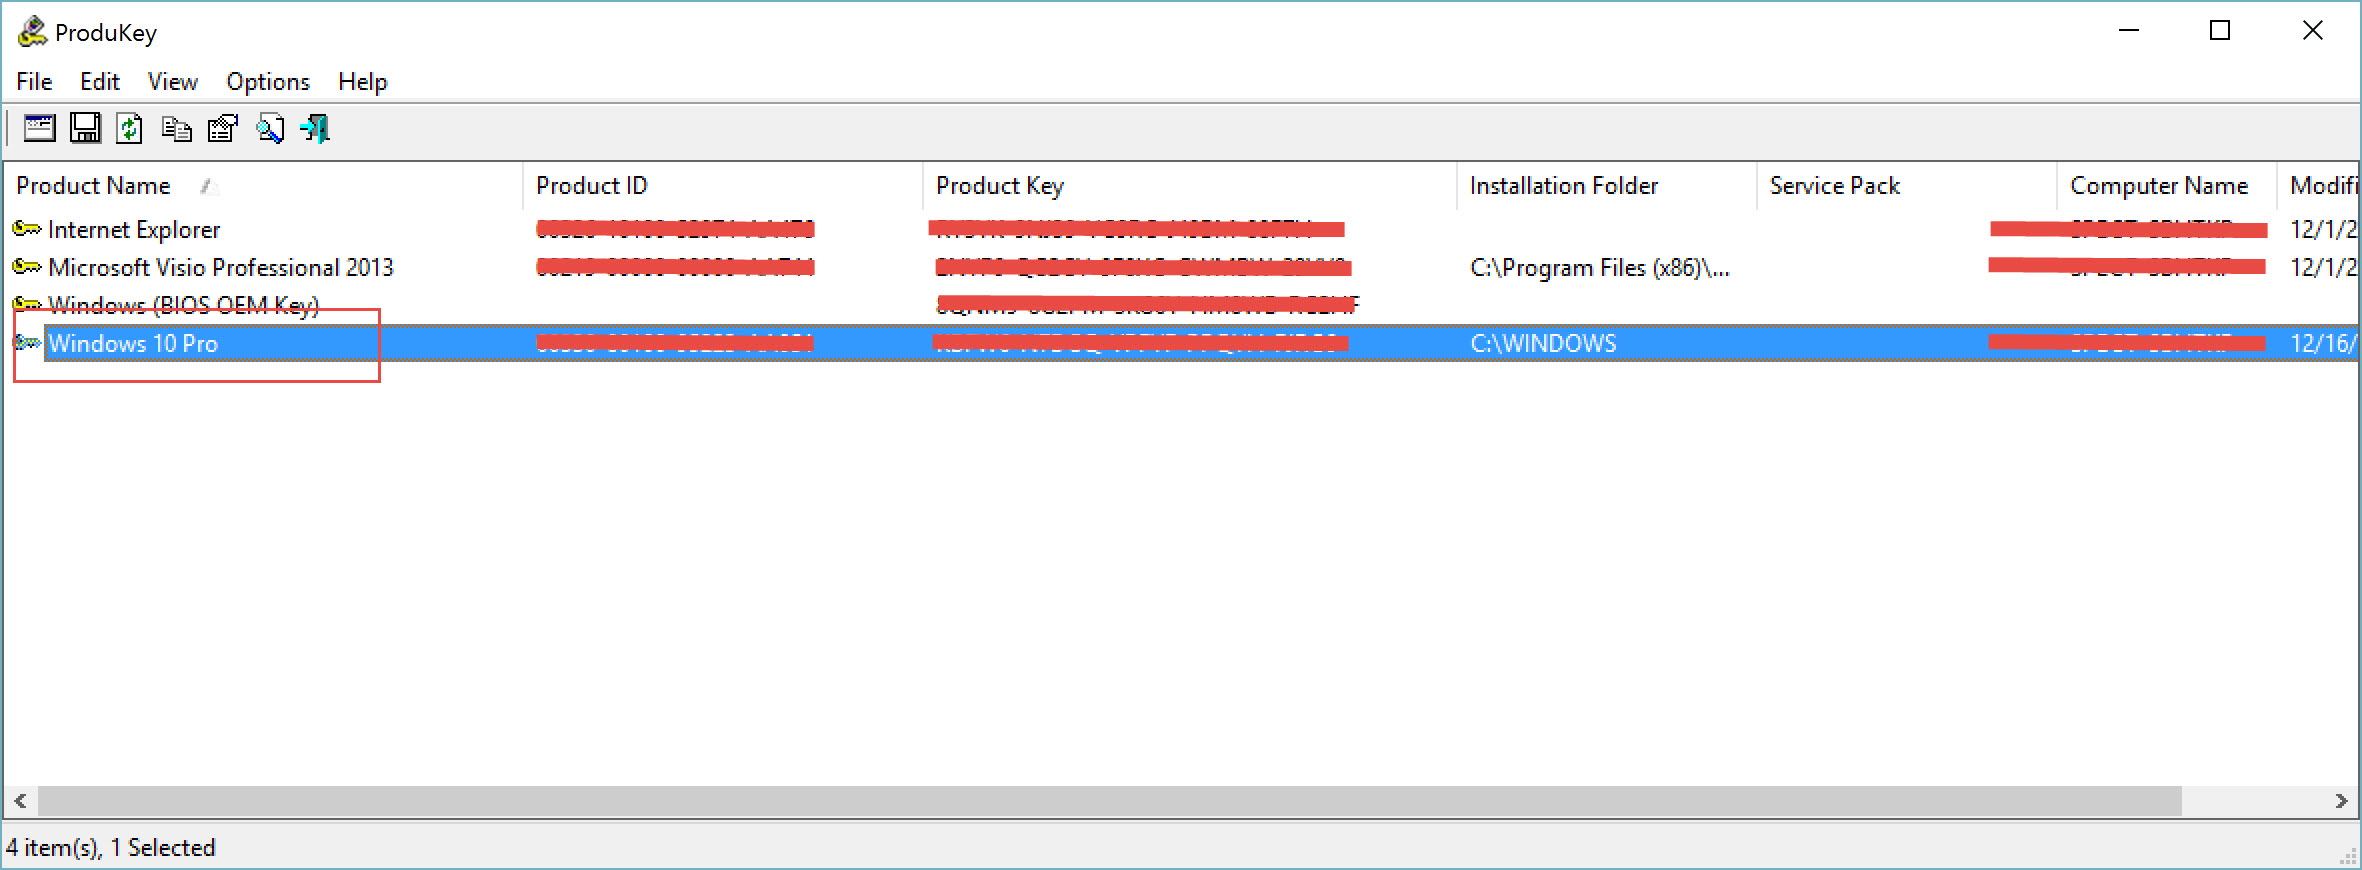 A Tool for Recovering Lost Product Keys for Windows 10, Windows Server 2012 R2 | Petri IT Knowledgebase